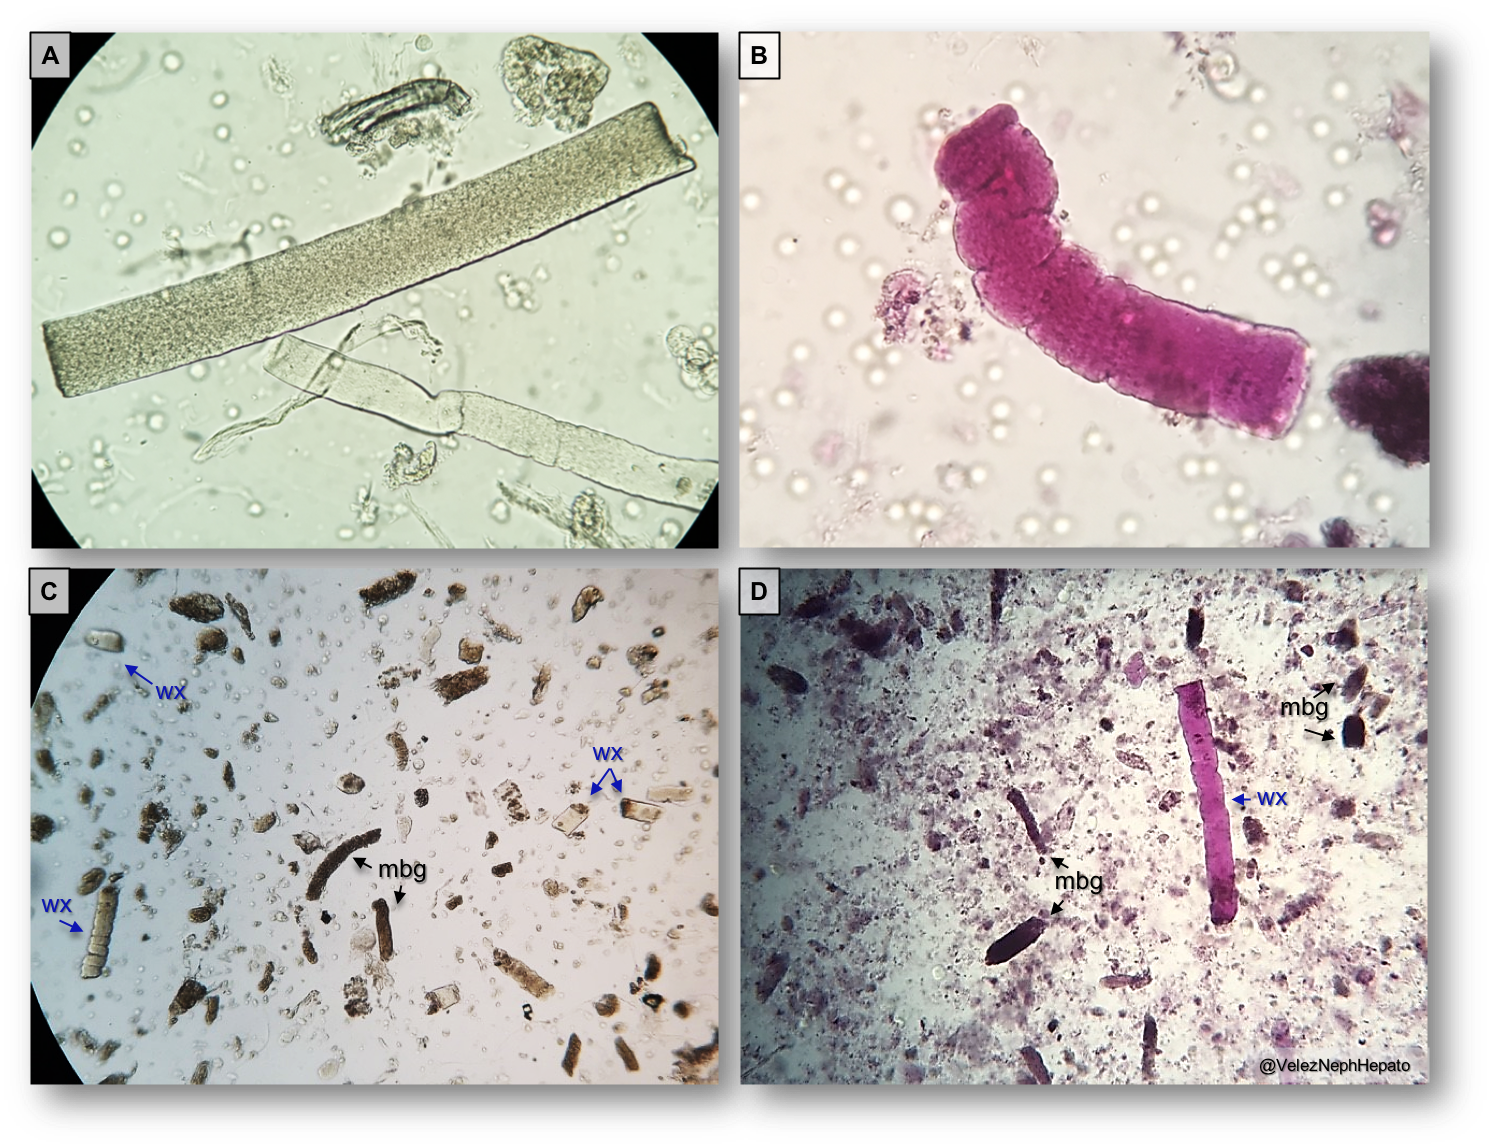 Hyaline Casts In Urine / Microscopic Analysis of Urine | Faculty of Medicine ... - The presence of casts in the urine as a result, not only the amount of urinary casts but also their type is indicated in the urine test.